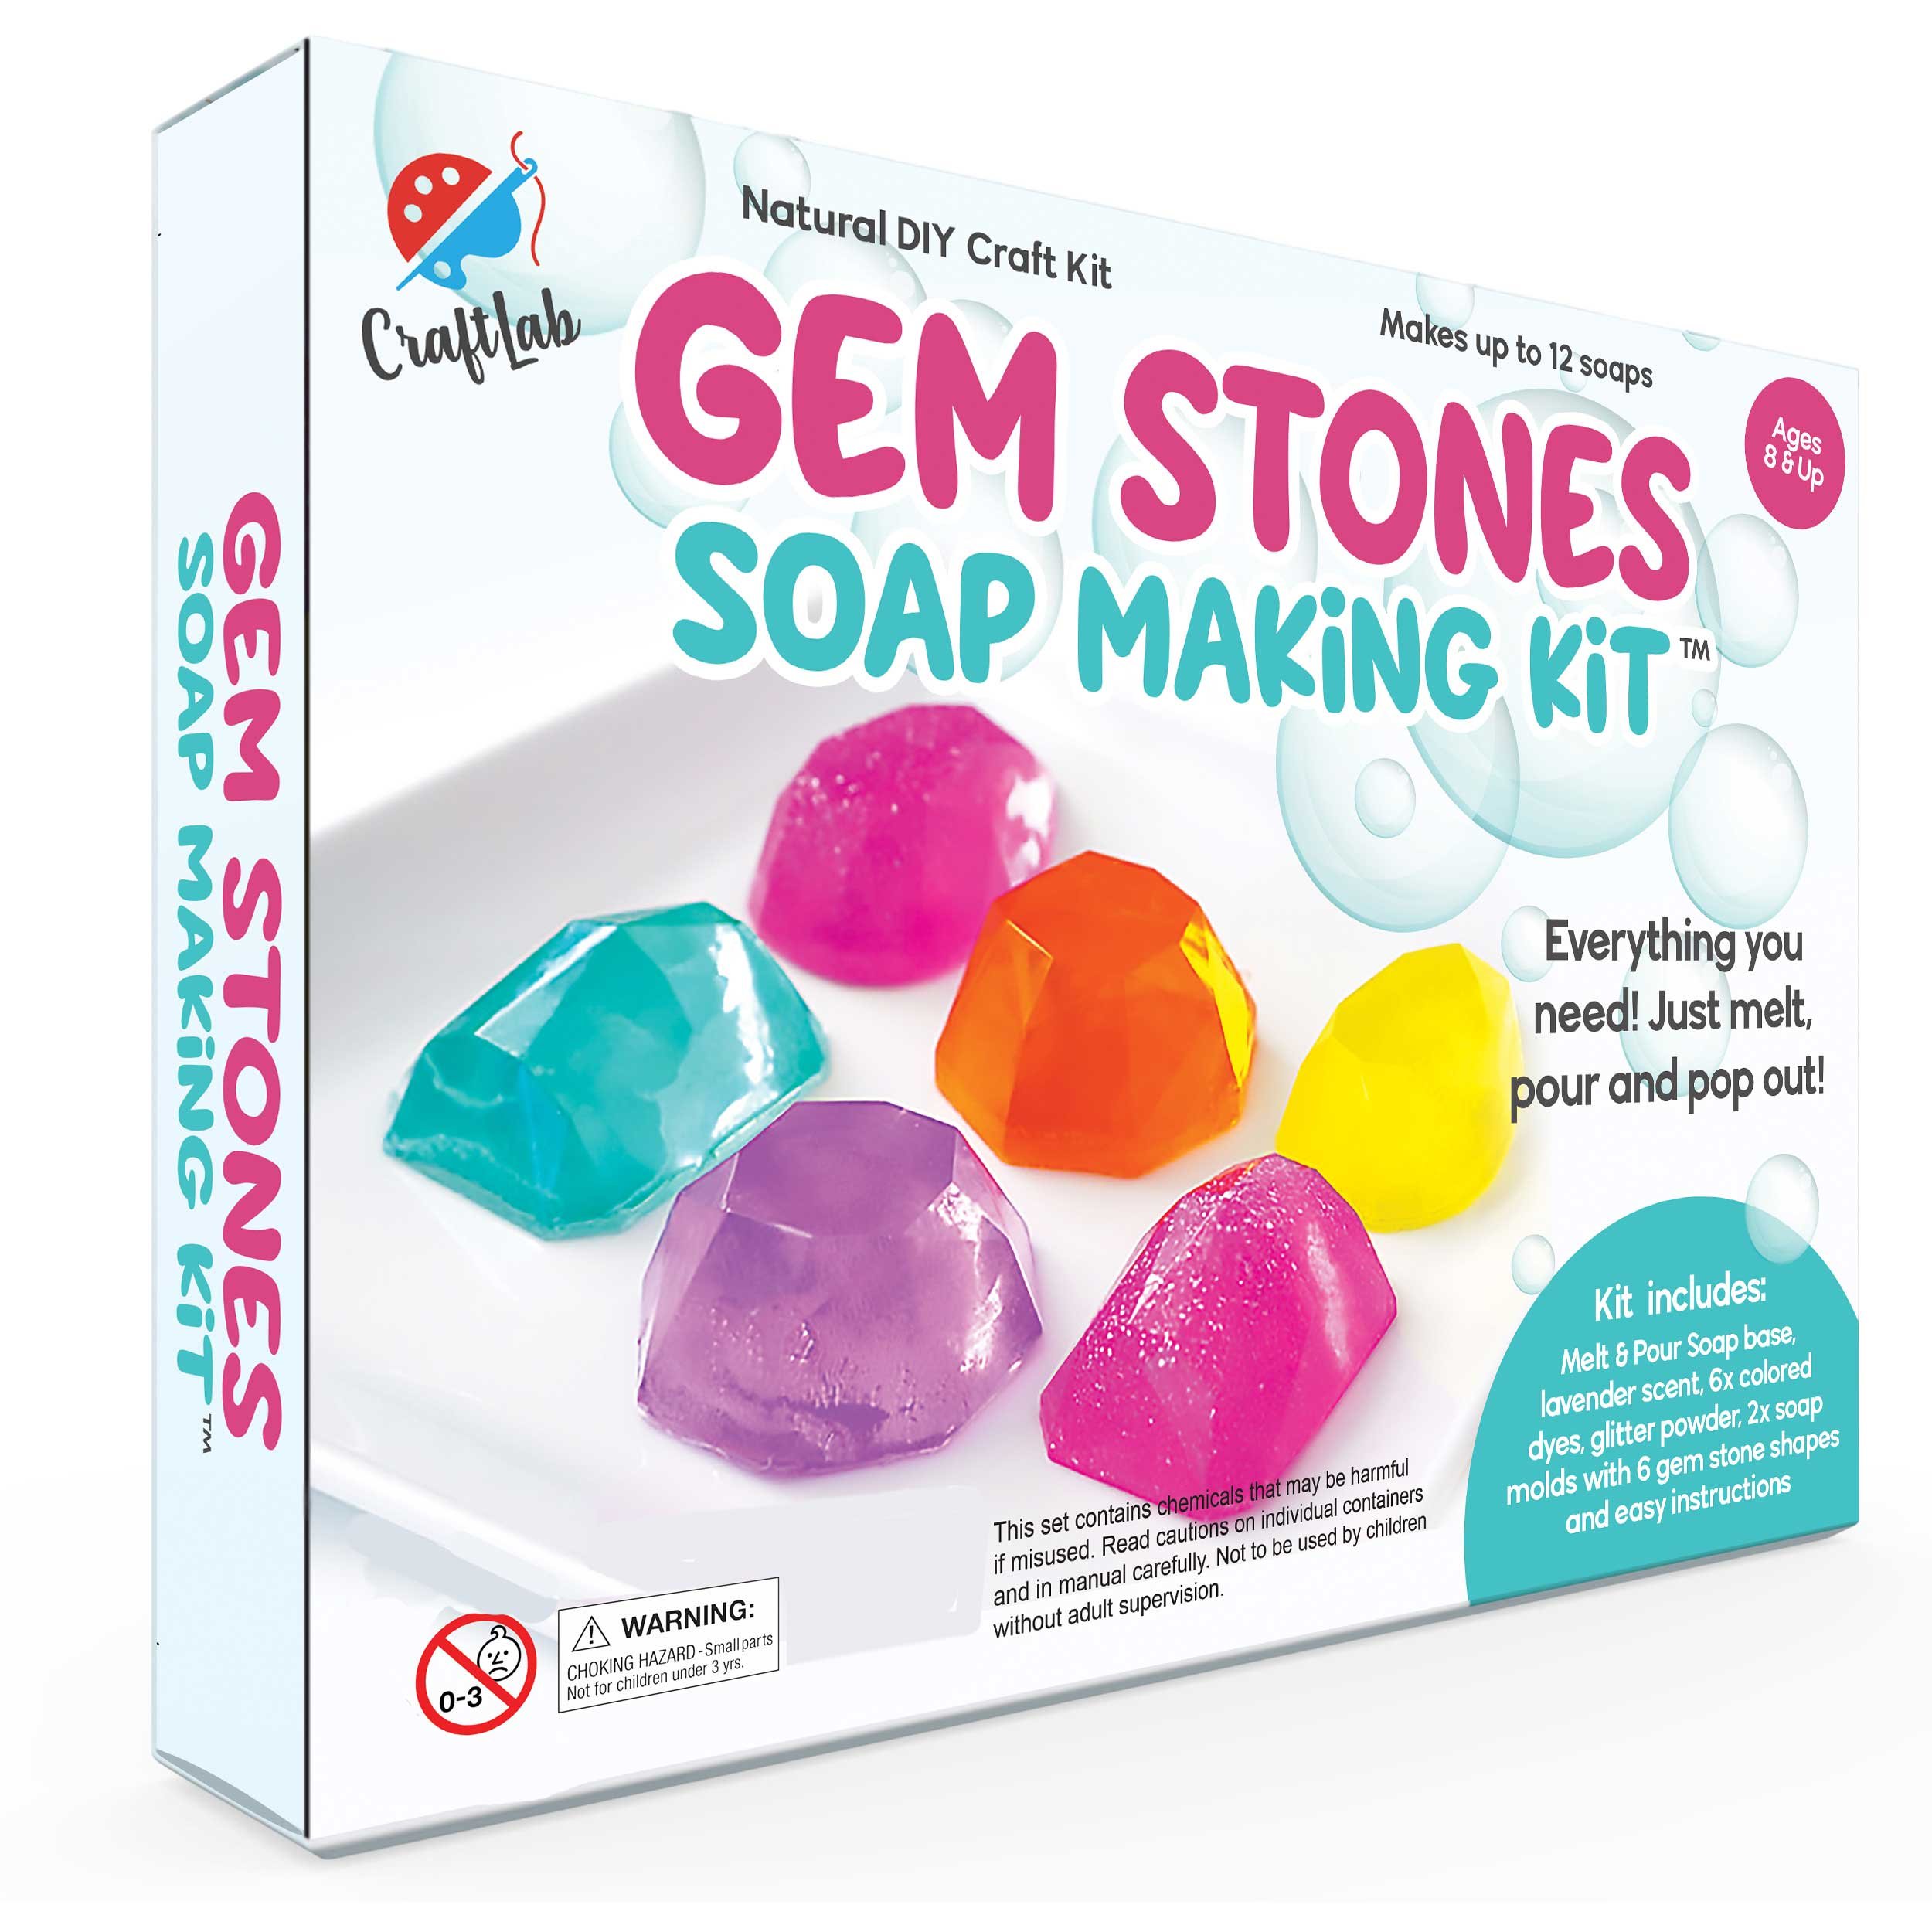 Gem Stones Soap Making Kit, Great DIY Craft Project, Gift & STEM Science Experiment for Kids Ages 8 and Up